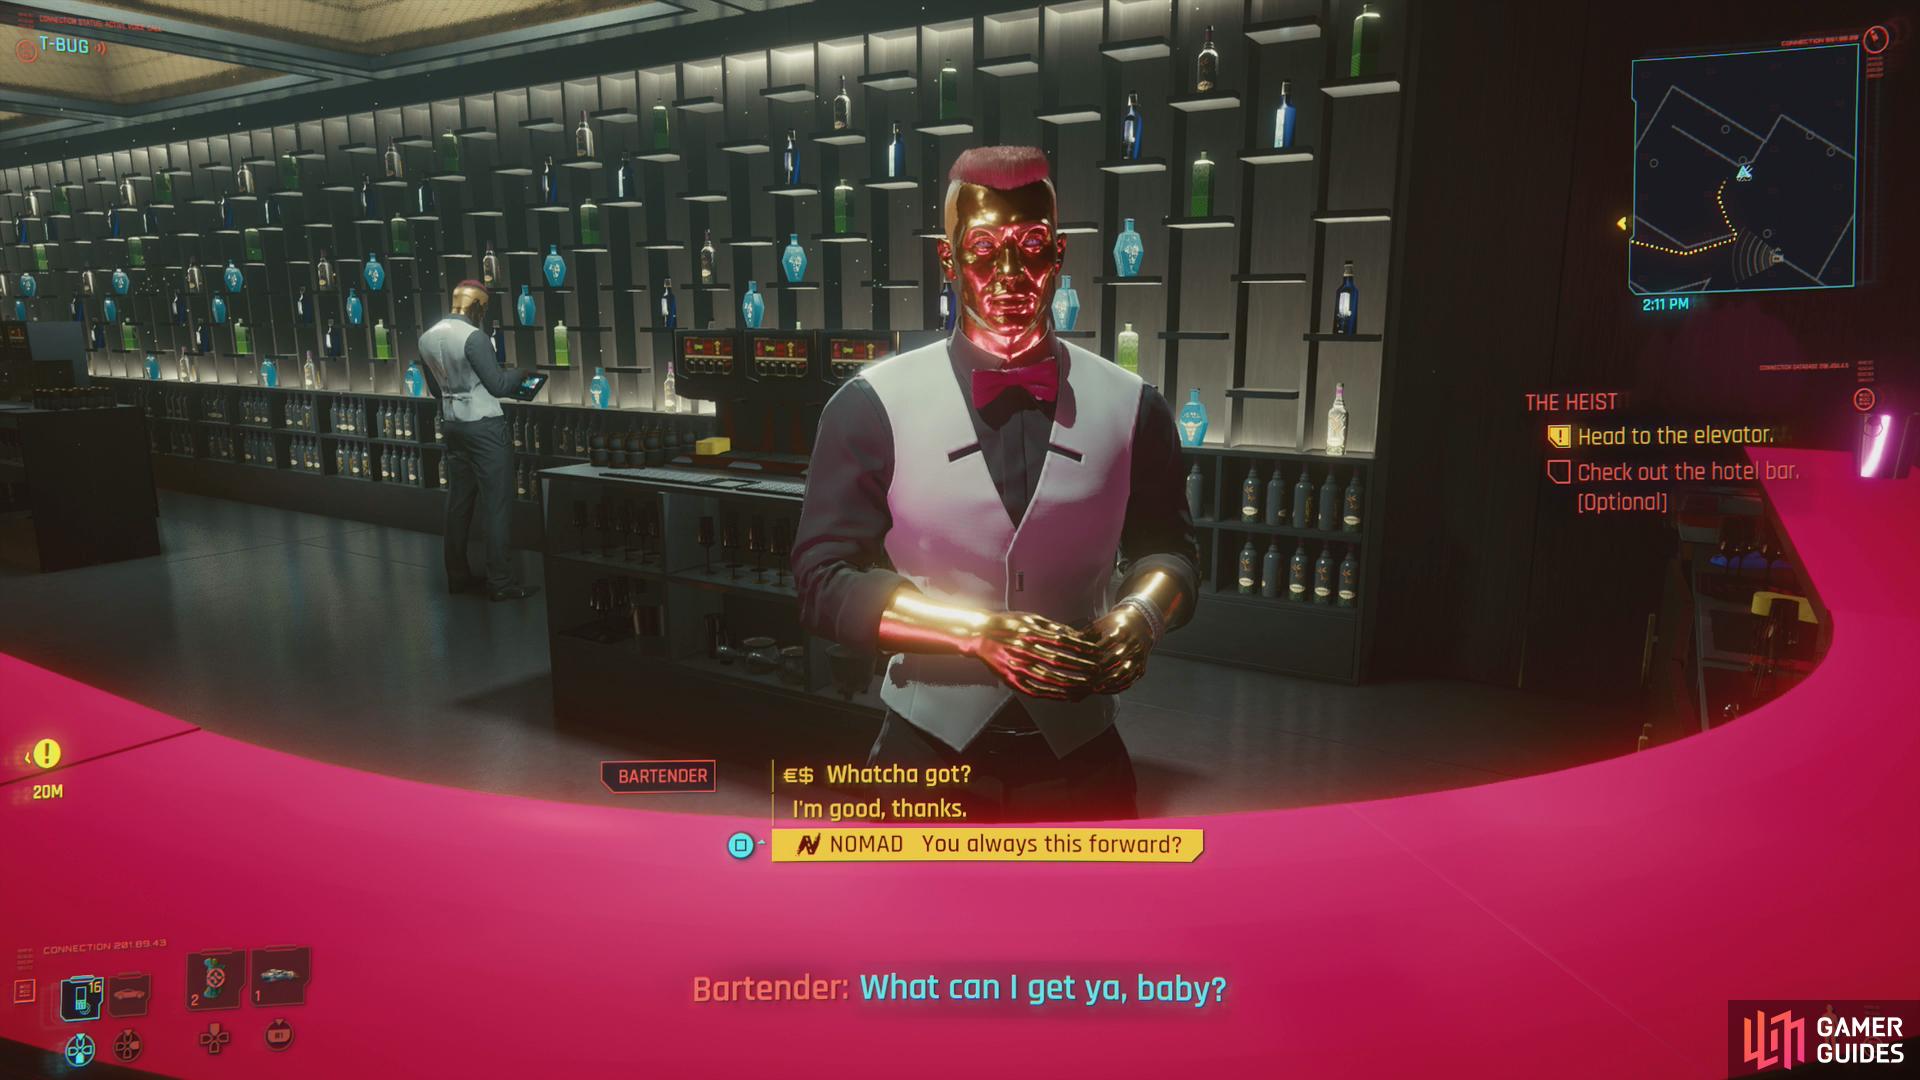 and Nomad characters can pick another unique dialogue option while talking to the bartender.